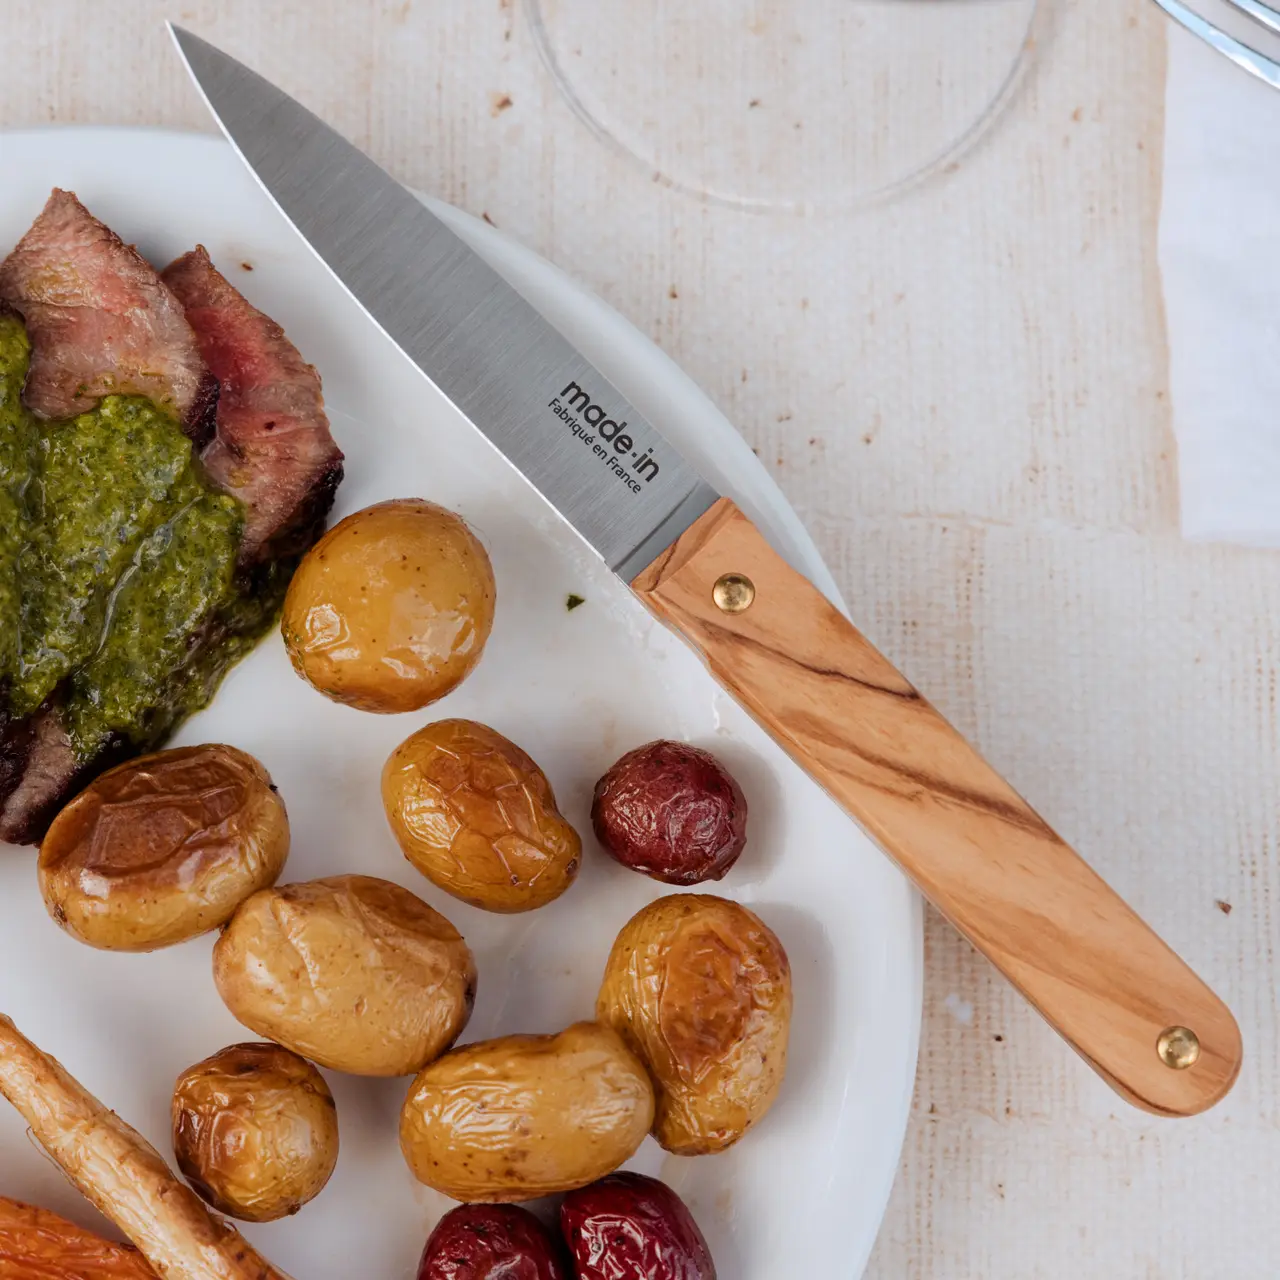 A chef's knife rests next to a plate of roasted potatoes and sliced steak with a dollop of green sauce.